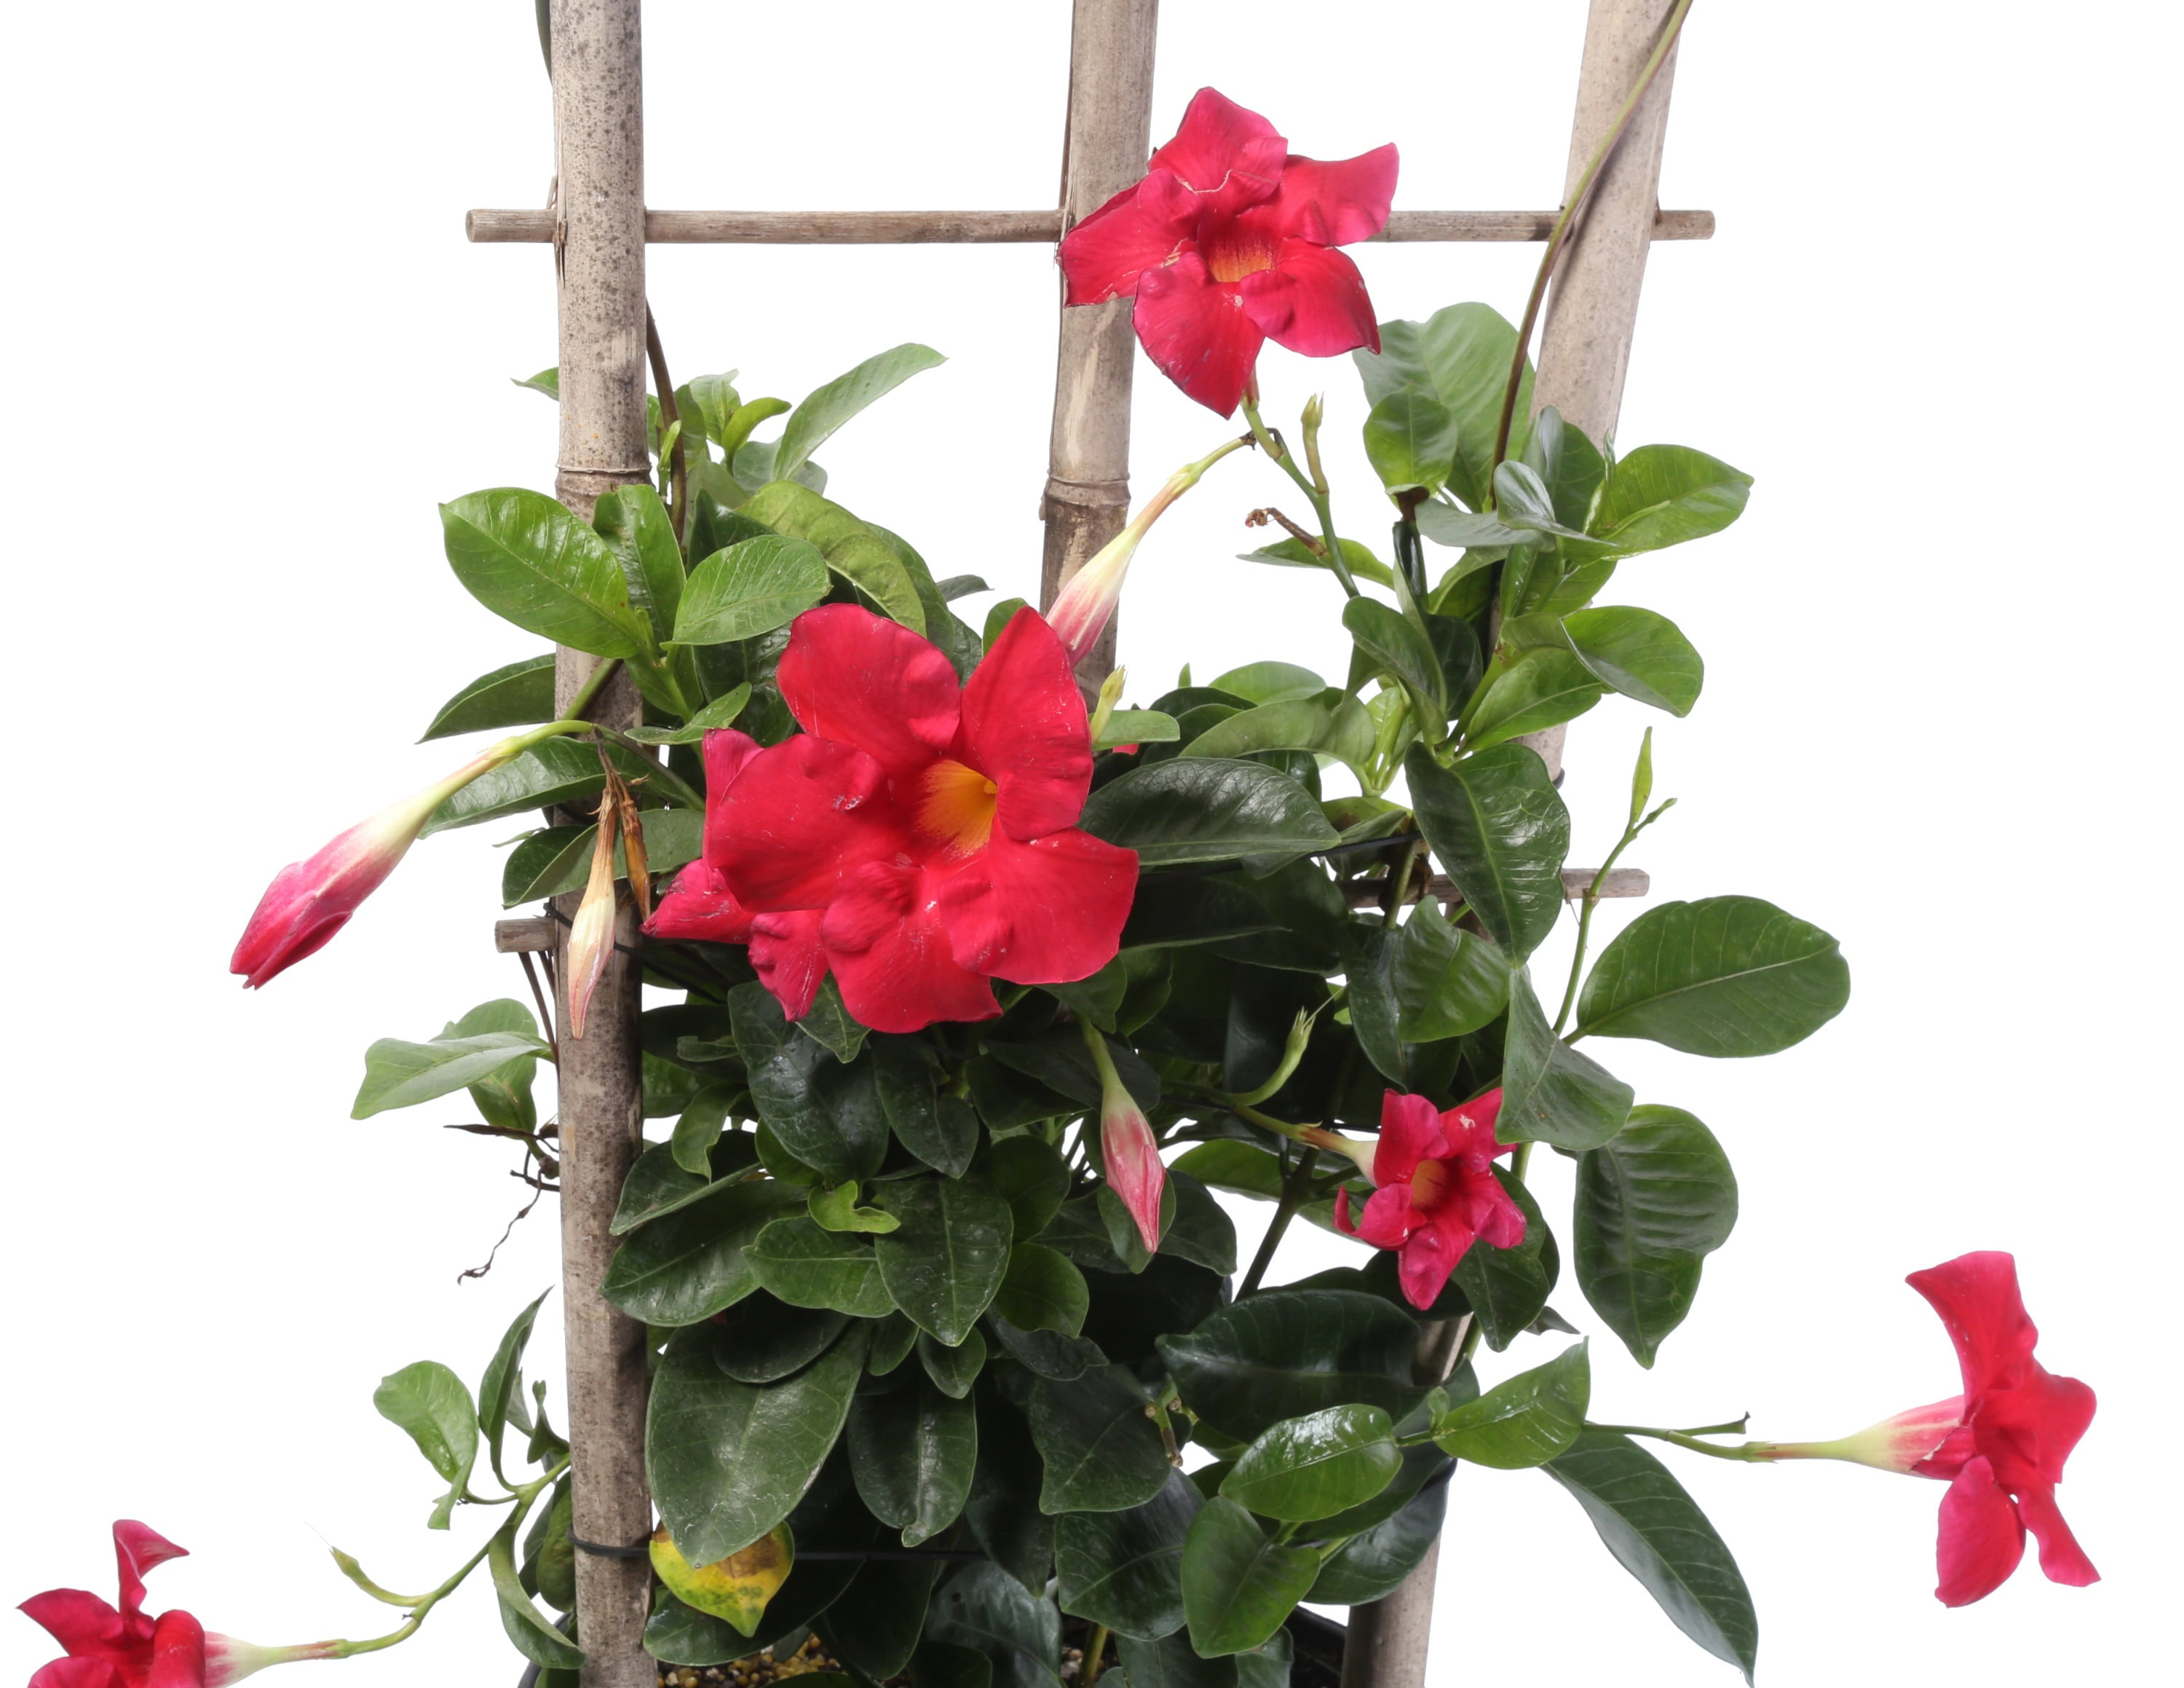 Costa Farms Island Blooms Live Outdoor 36in. Tall Assorted Mandevilla; Full Sun Outdoors Plant in 10in. Grower Pot